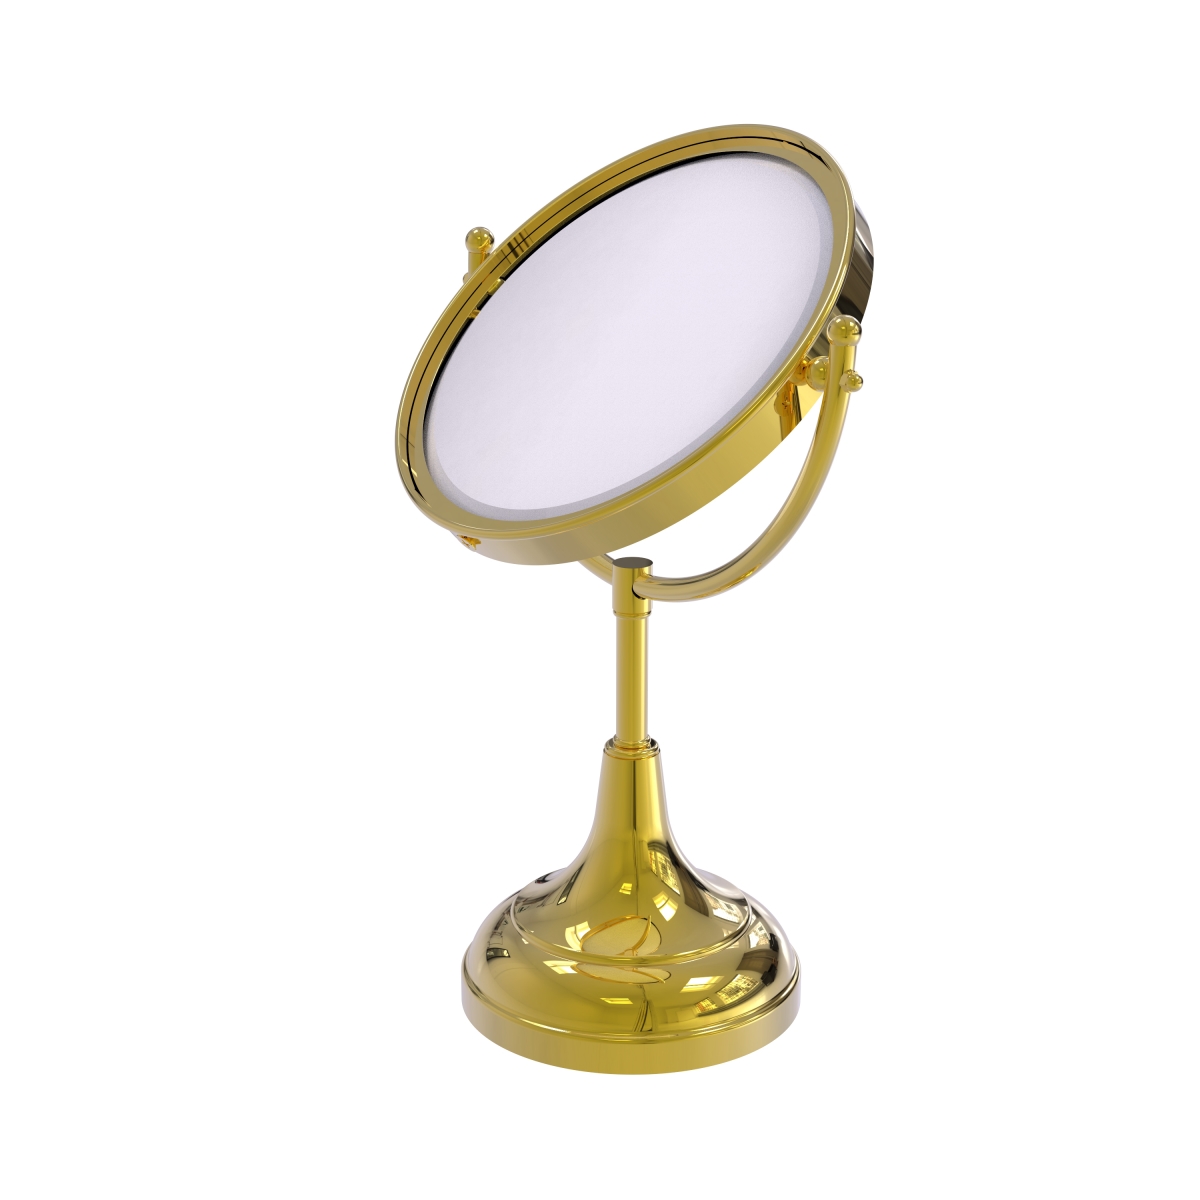 Dm-2-2x-unl Dotted Ring Style 8 In. Vanity Top Make-up Mirror 2x Magnification, Unlacquered Brass